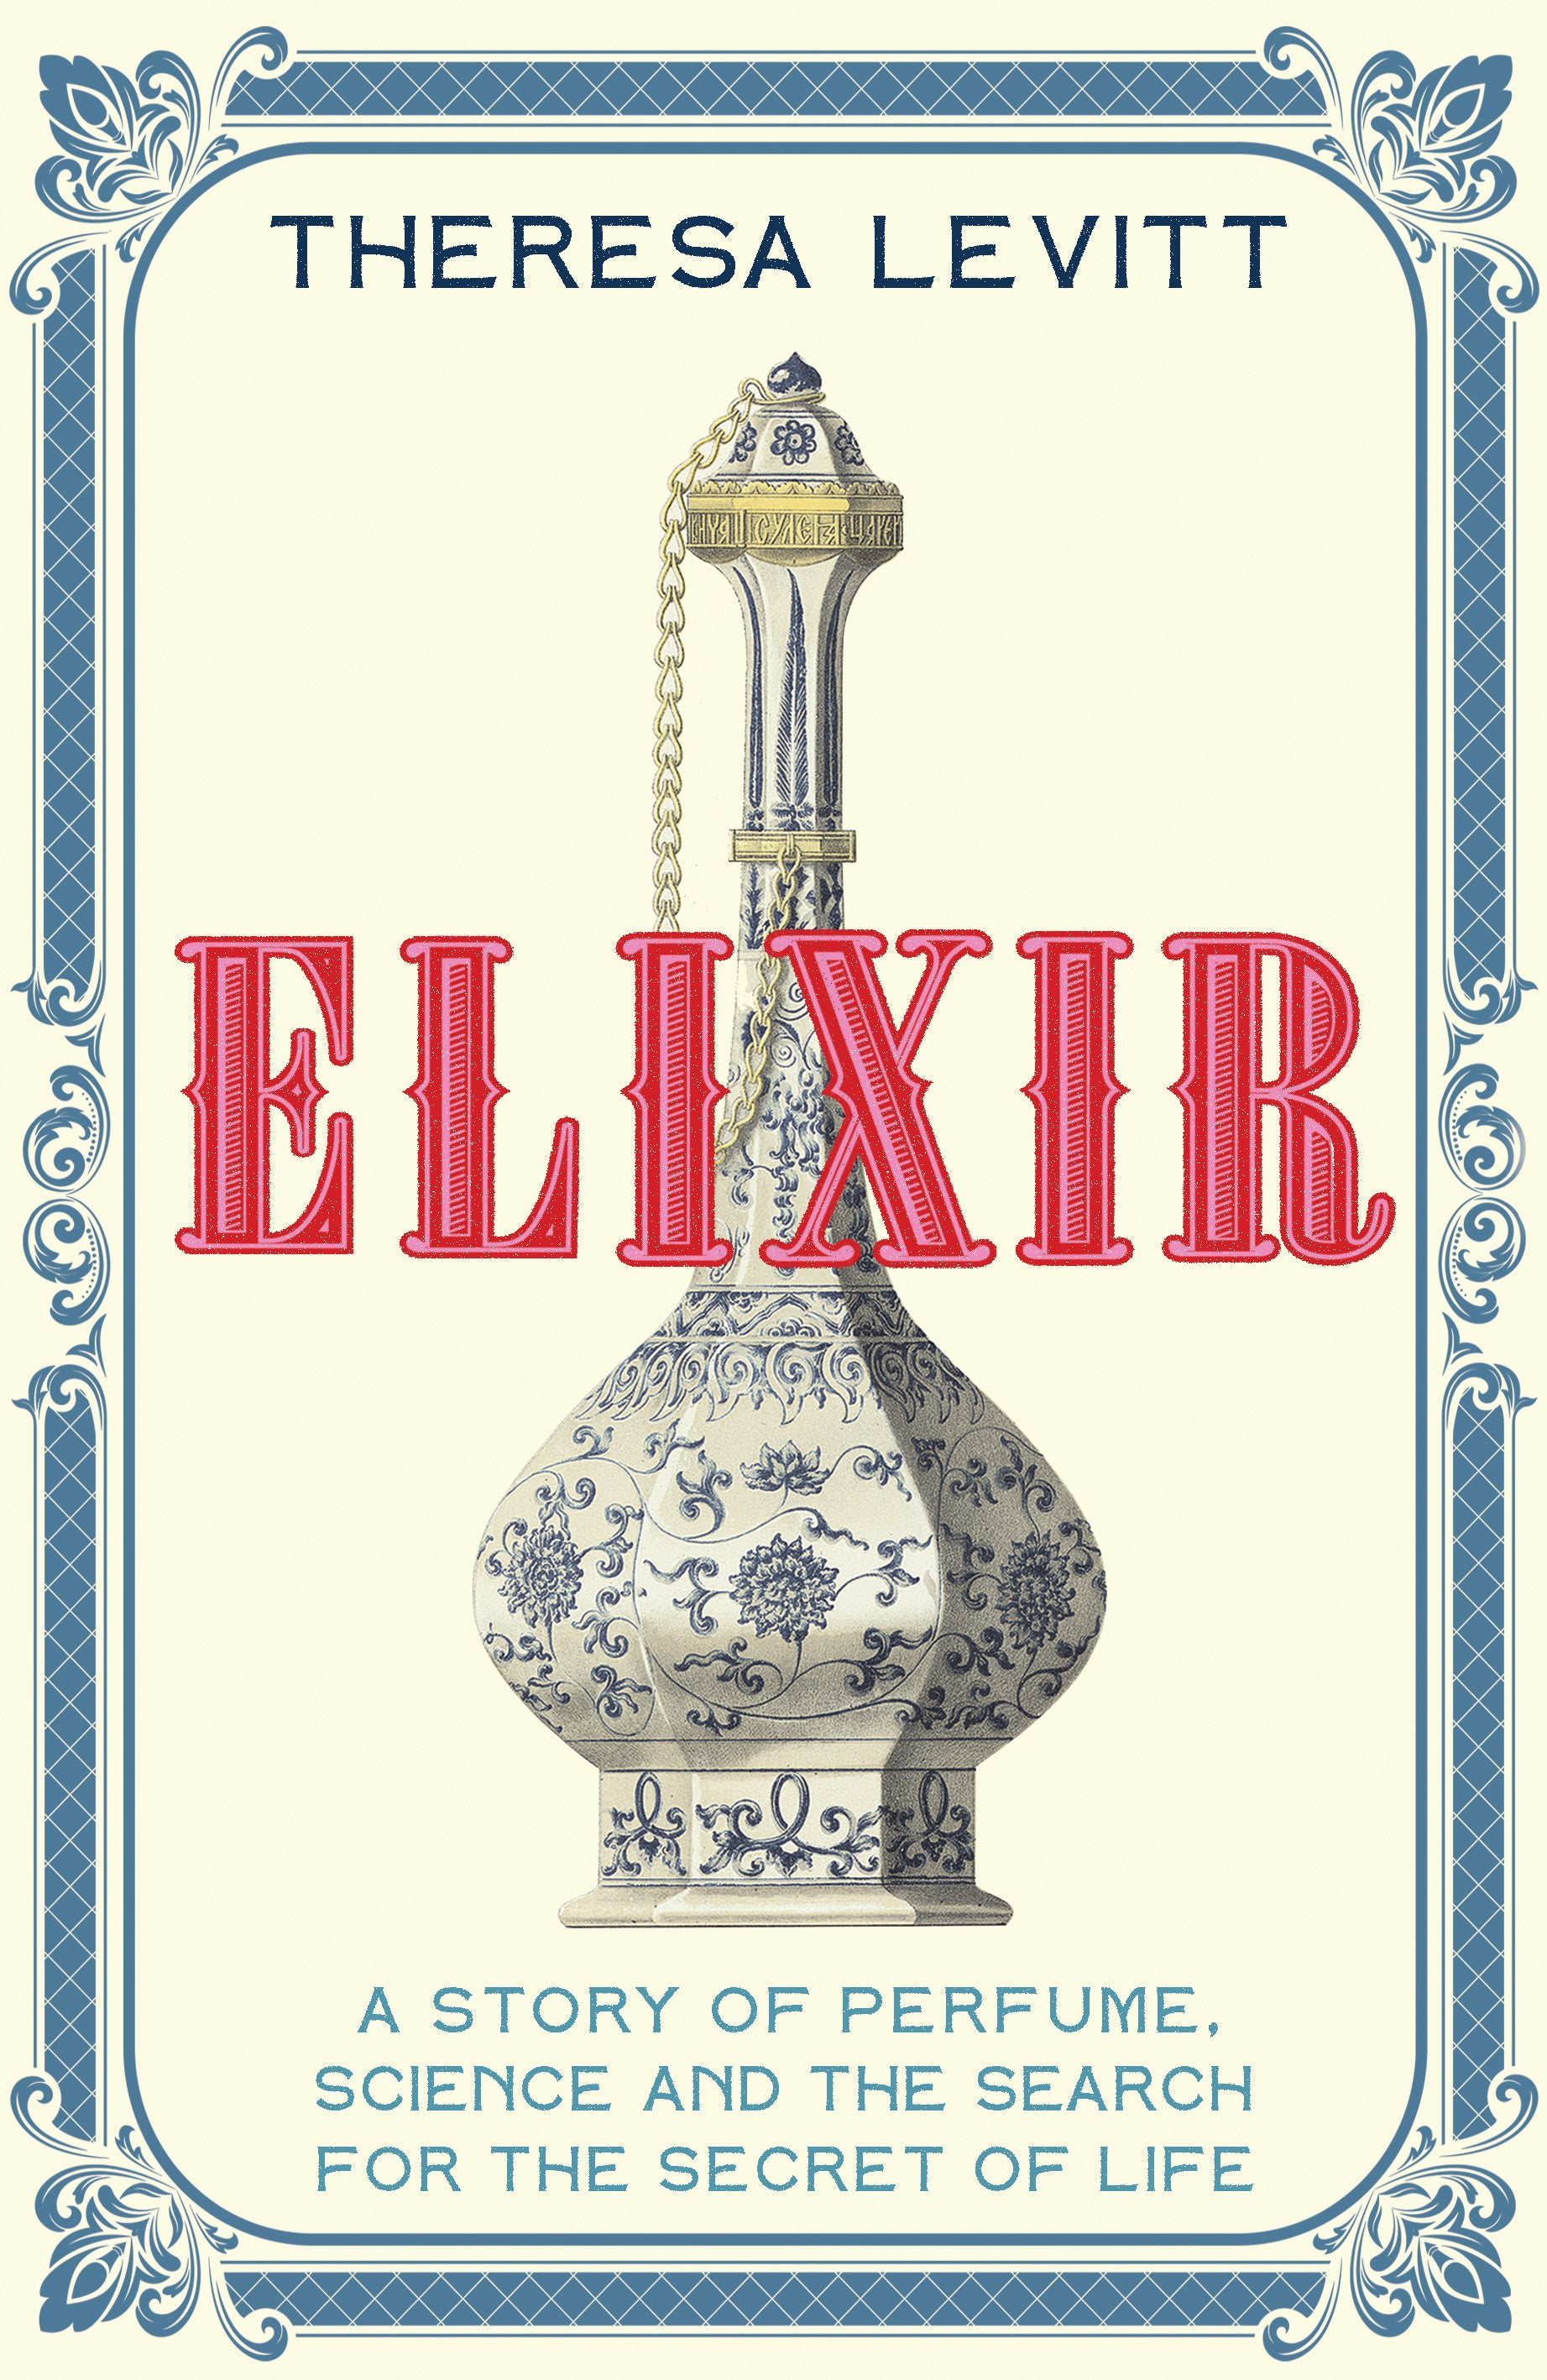 Elixir: The Story of Perfume, Science and the Search for the Secret of Life